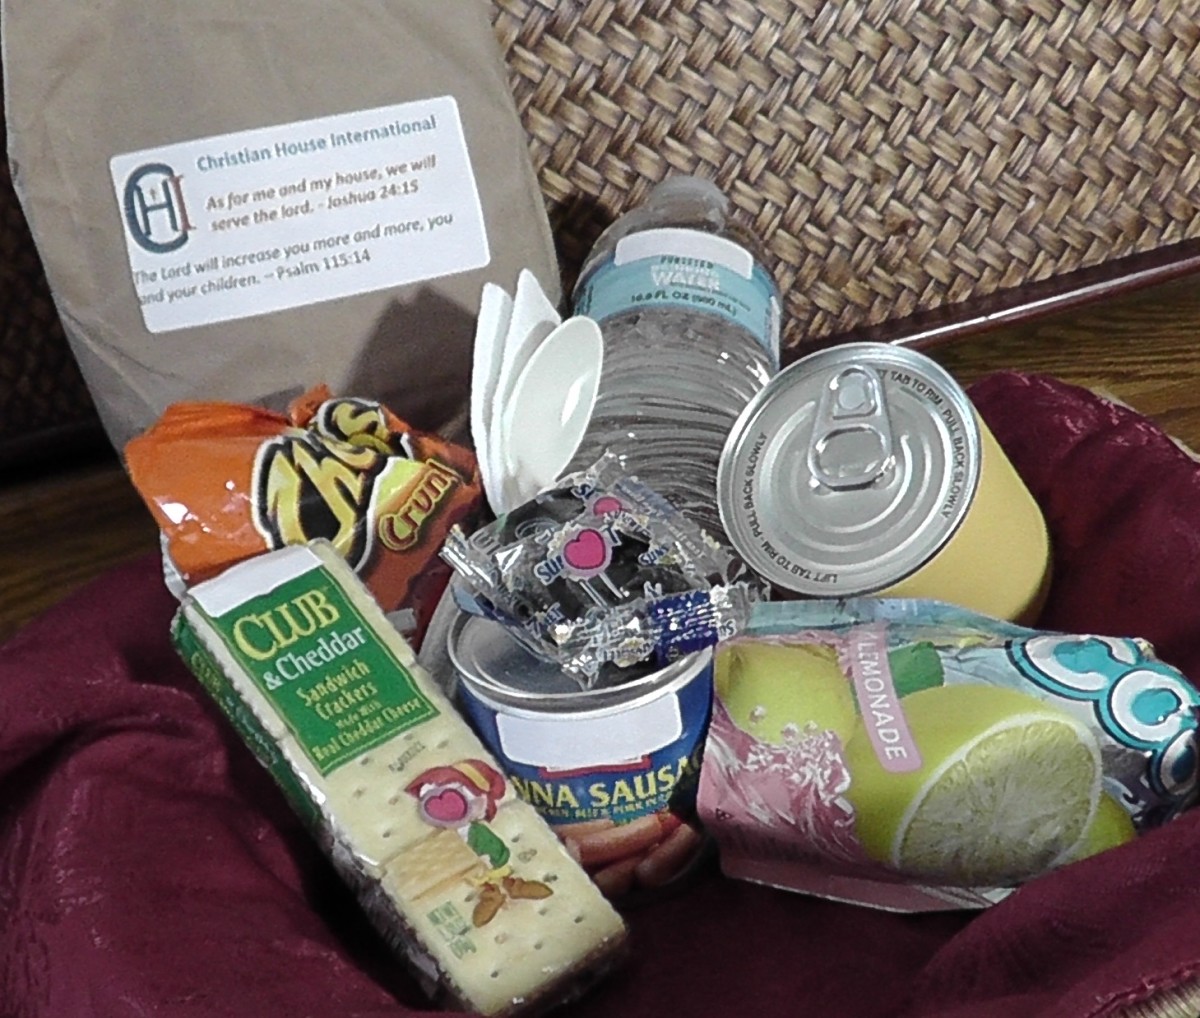 H.O.W. Humanity One World - Put Together a Feed the Hungry Package to Feed One Person at a Time